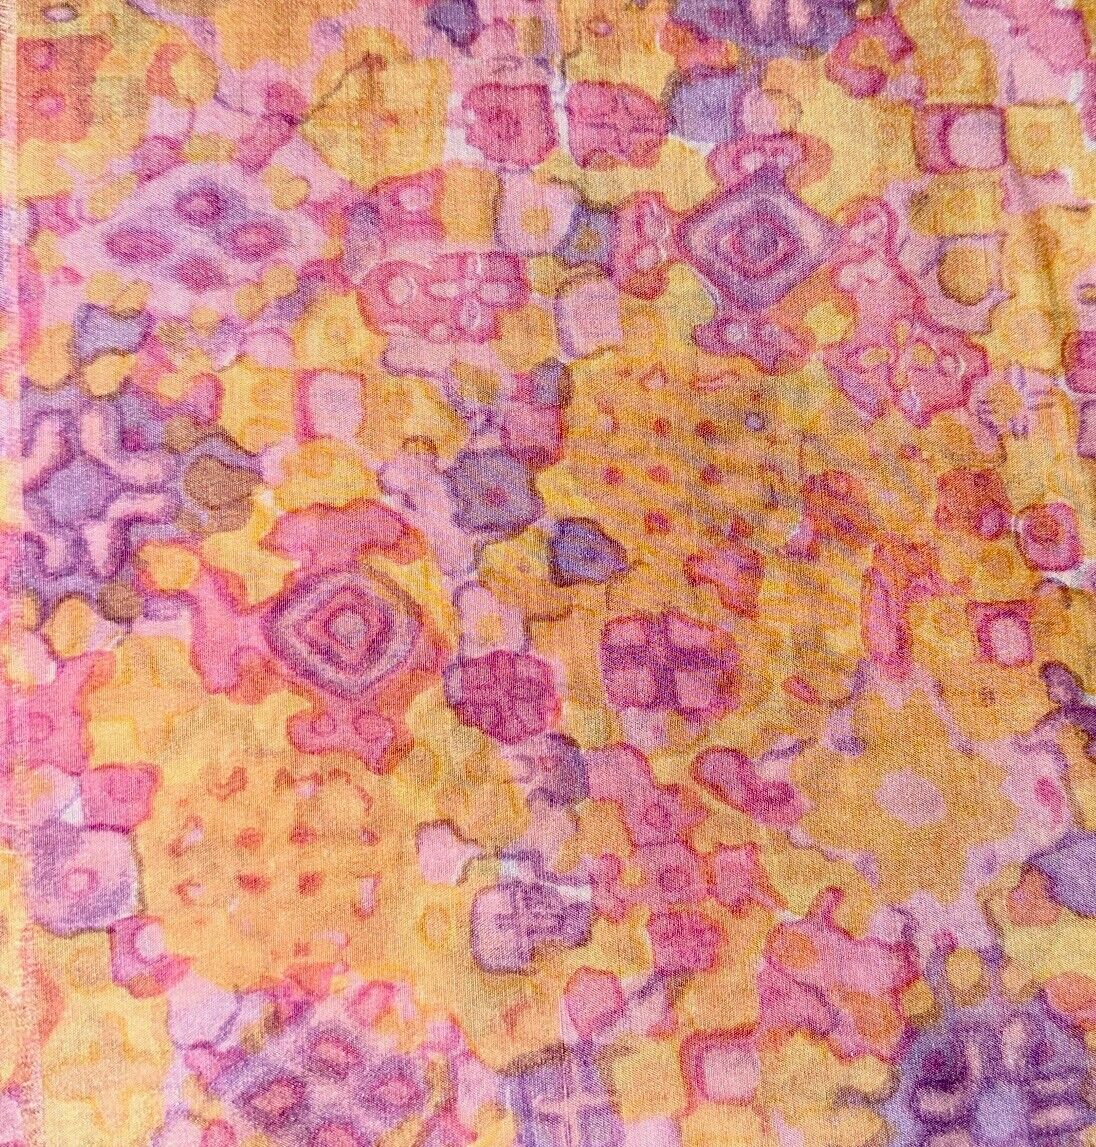 EXQUISITE Vintage Silk Fabric Dreamy Lavender Pink & Yellow Collage W40”L6.4Yds